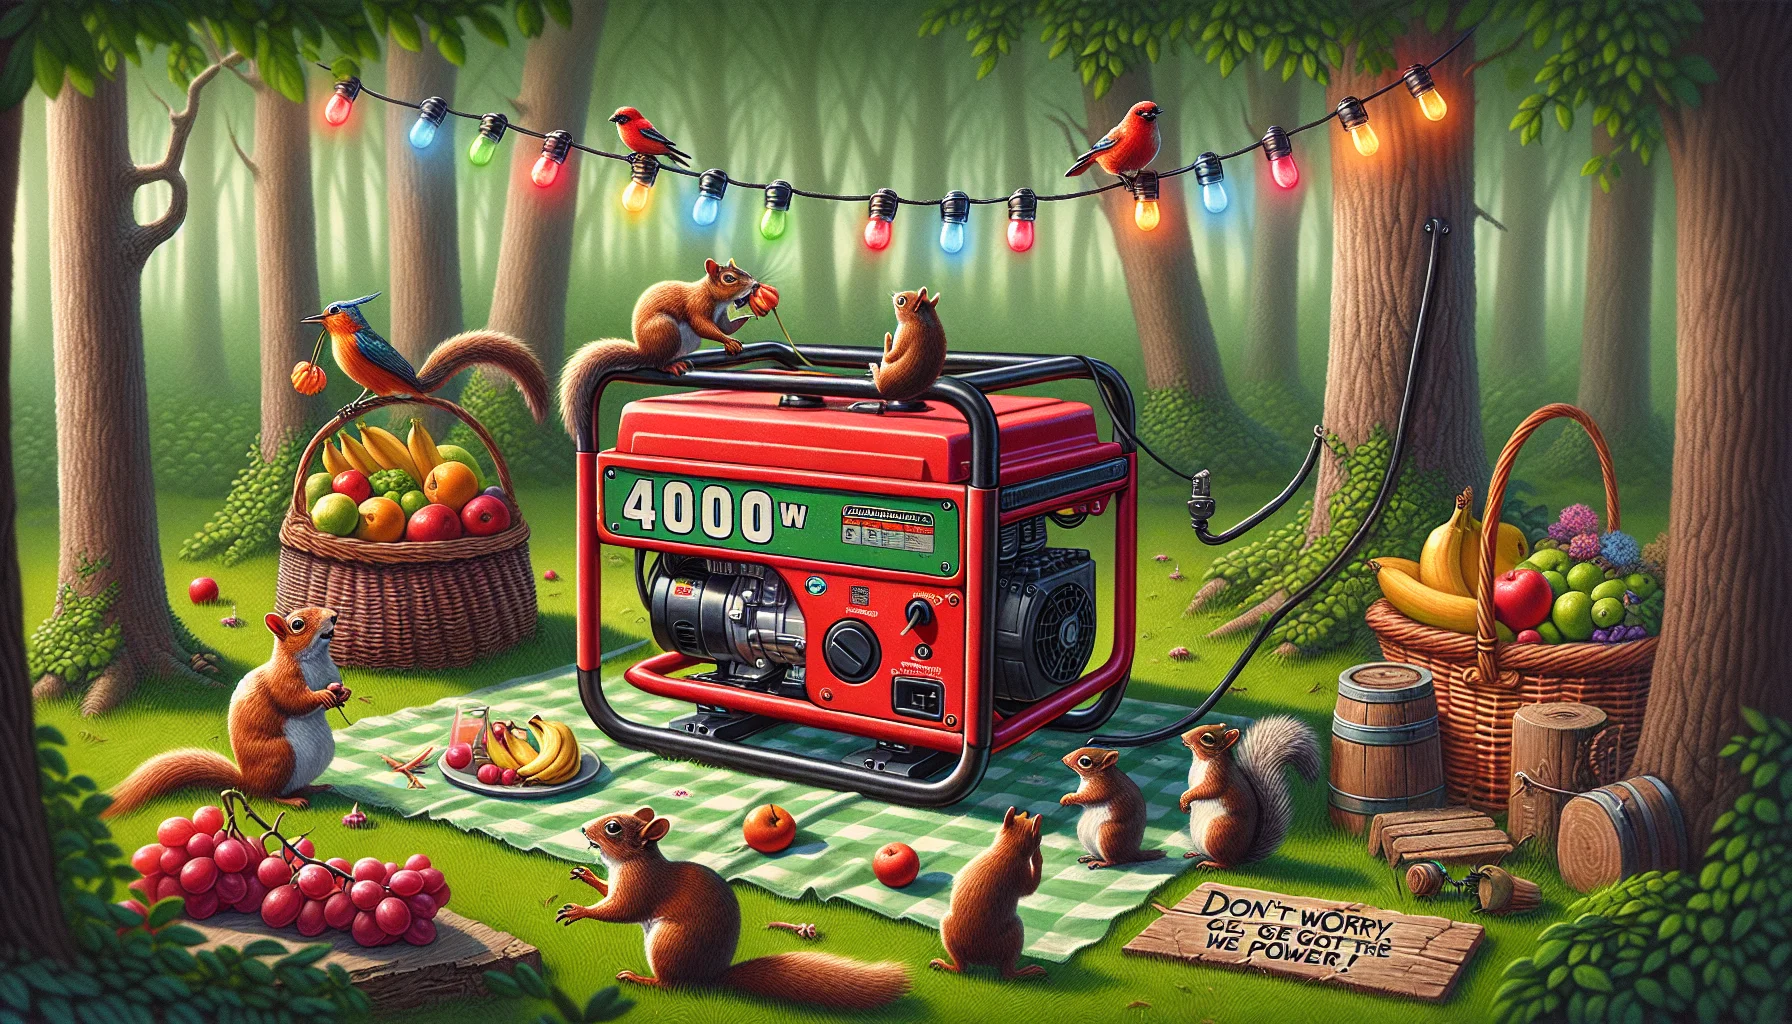 Create a realistic image depicting a 4000W generator, painted in bright red. It's placed in a hilarious setting: in the middle of a picnic, next to a basket full of fruits, surrounded by woodland creatures seemingly participating in the picnic. The squirrels are attempting to turn it on, while birds are perched on top, chirping in amusement. The generator is plugged into a string of colorful fairy lights hanging from the trees, and a sign next to it humorously reads 'Don't worry, we got the power!' This whimsical scene playfully encourages the concept of generating electricity.